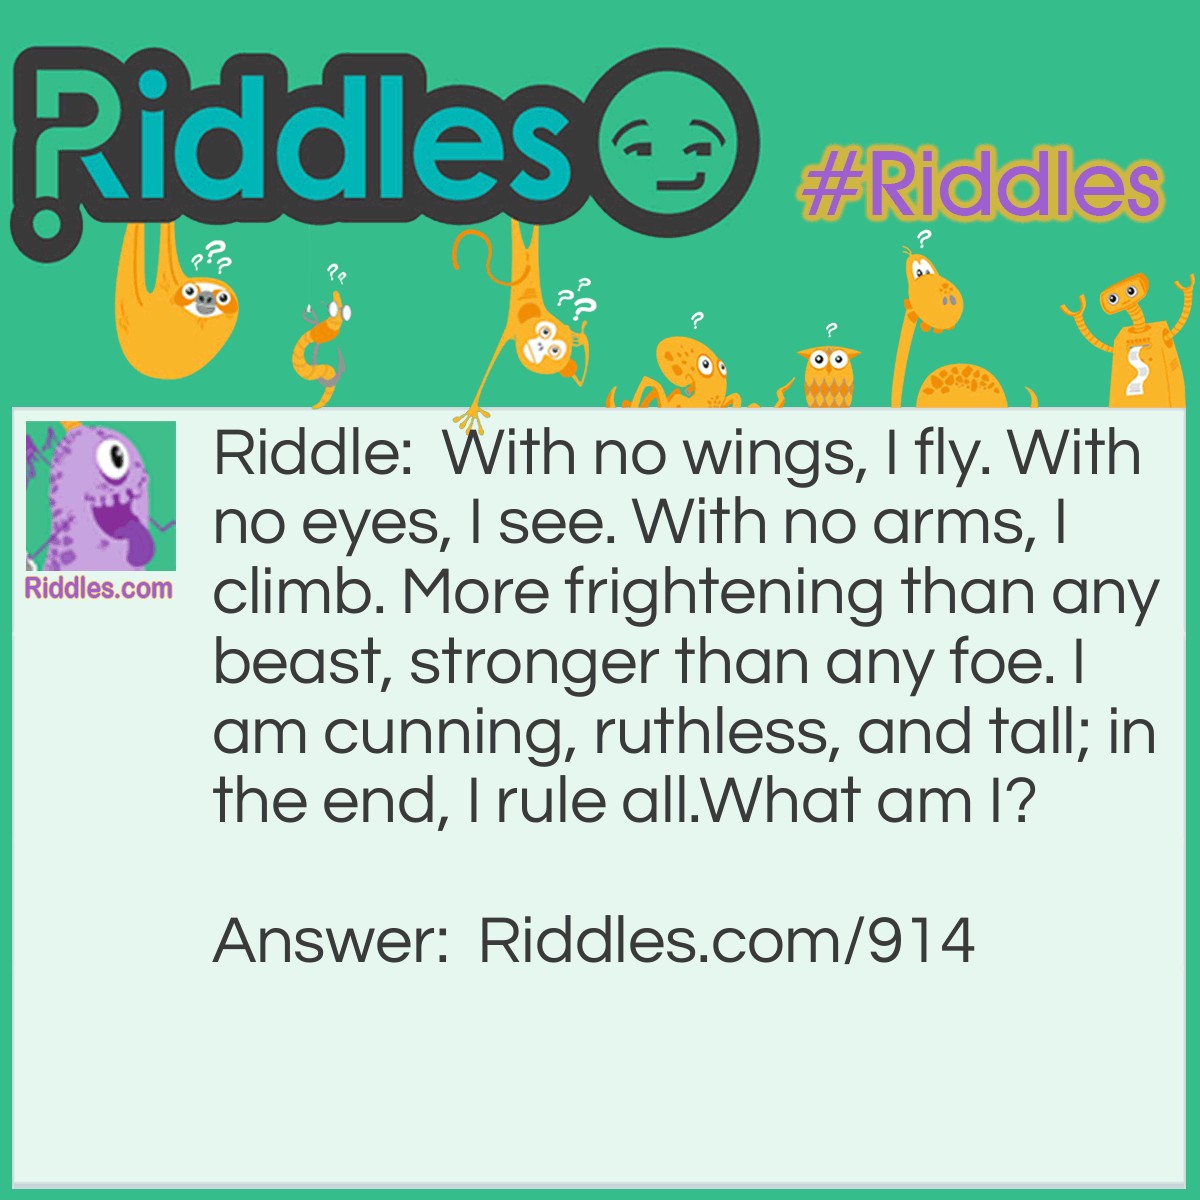 Riddle: With no wings, I fly. With no eyes, I see. With no arms, I climb. More frightening than any beast, stronger than any foe. I am cunning, ruthless, and tall; in the end, I rule all.
What am I? Answer: The imagination.